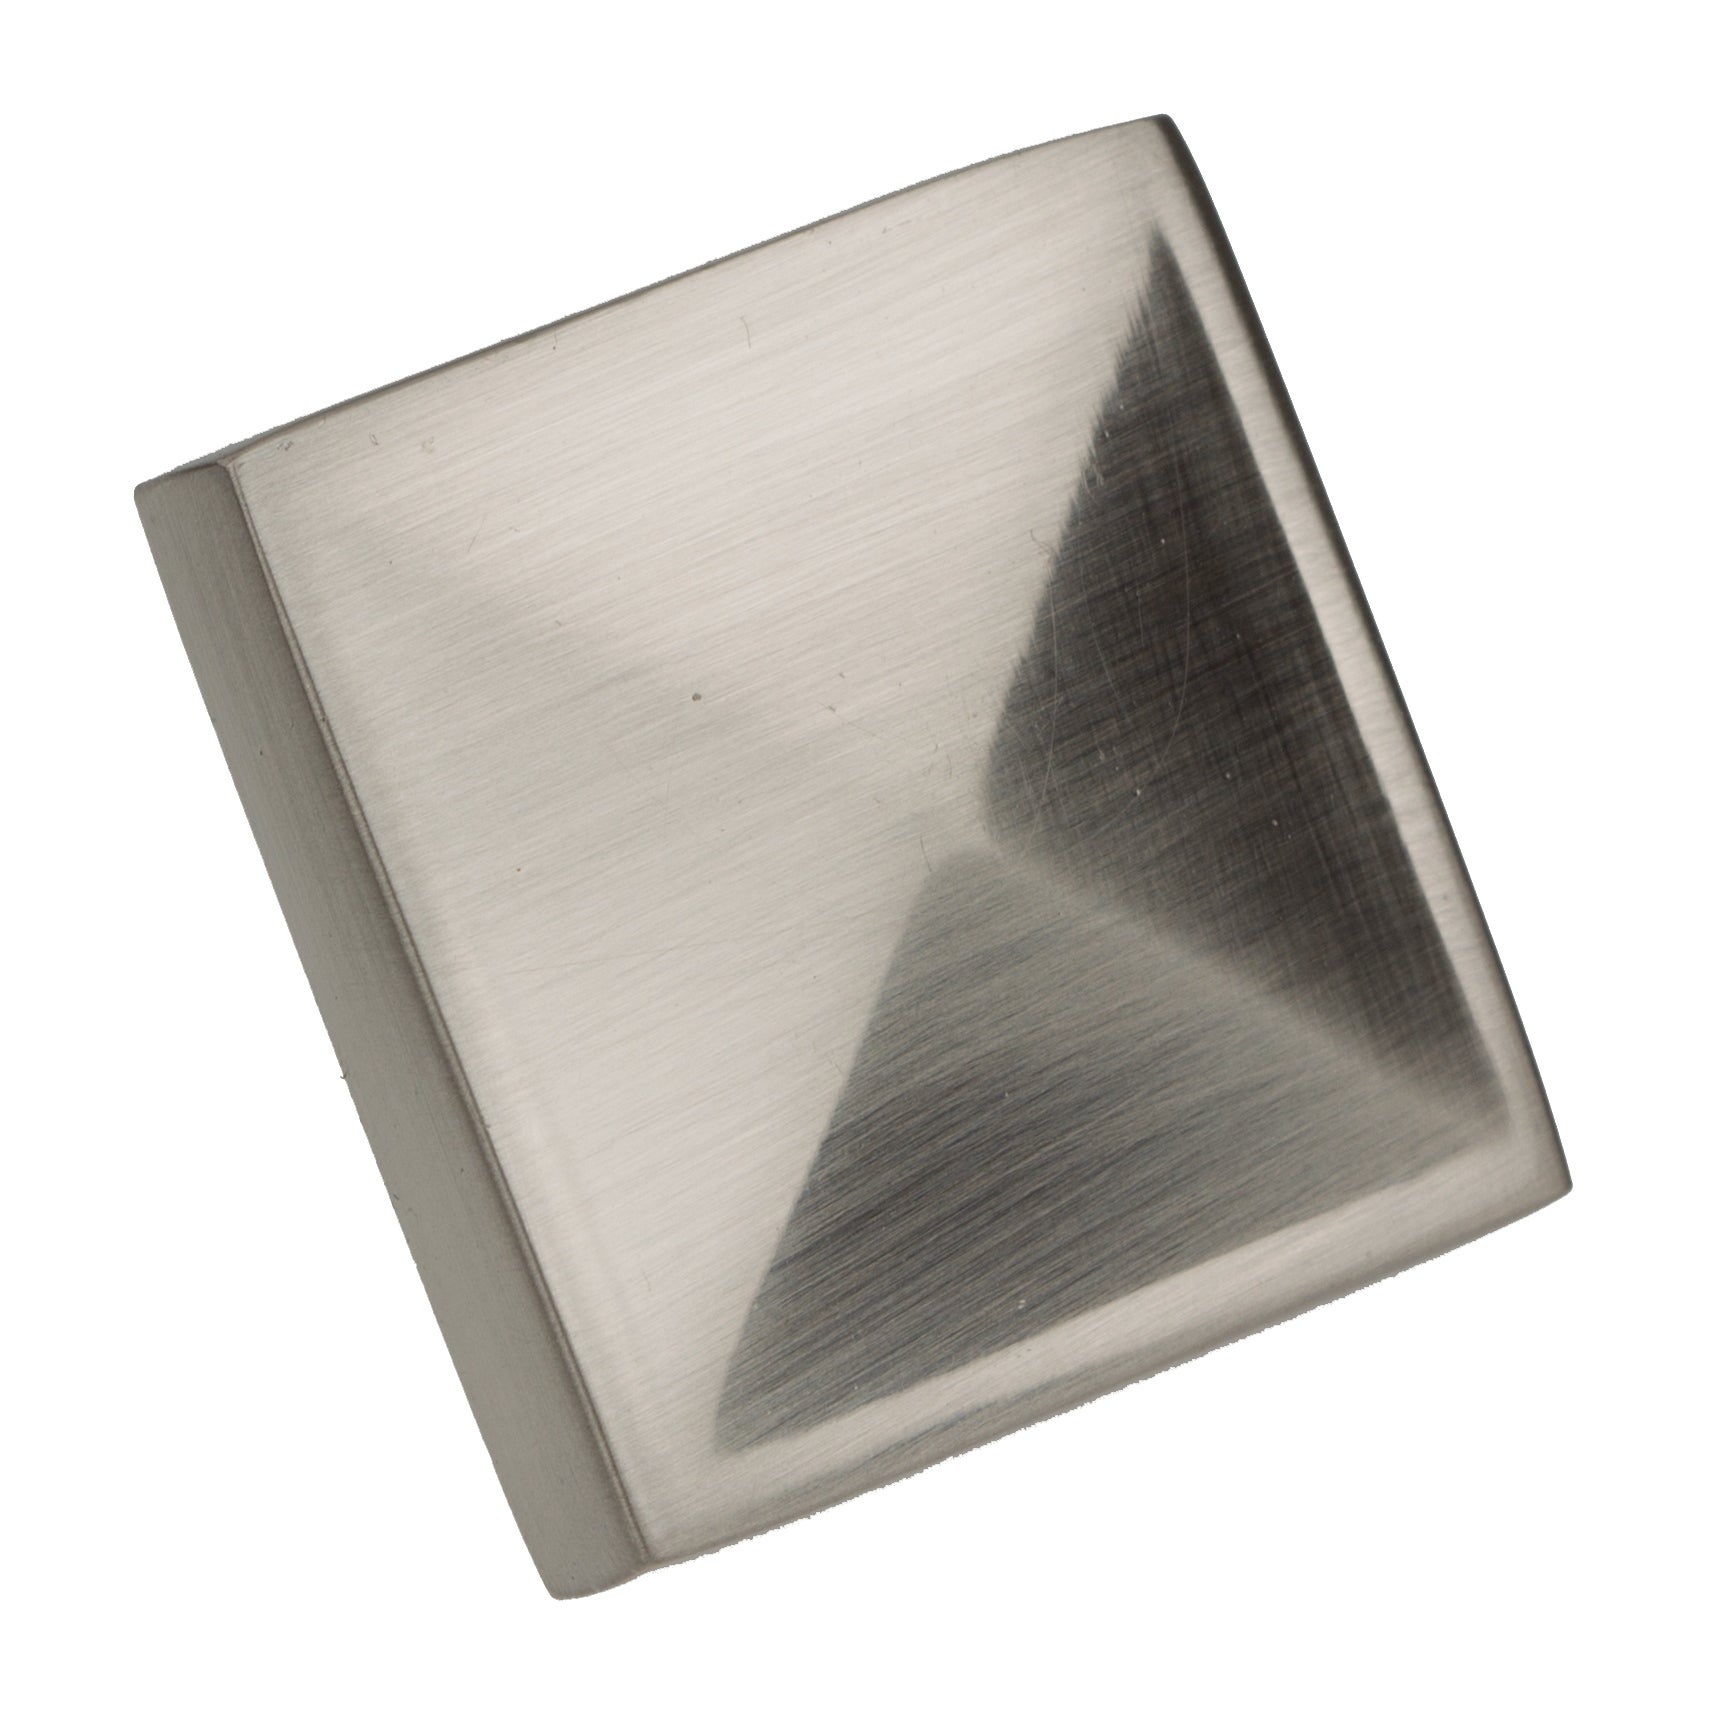 GlideRite 1-1/4 in. Classic Square Pyramid Cabinet Knobs, Satin Nickel, Pack of 25 - image 5 of 5